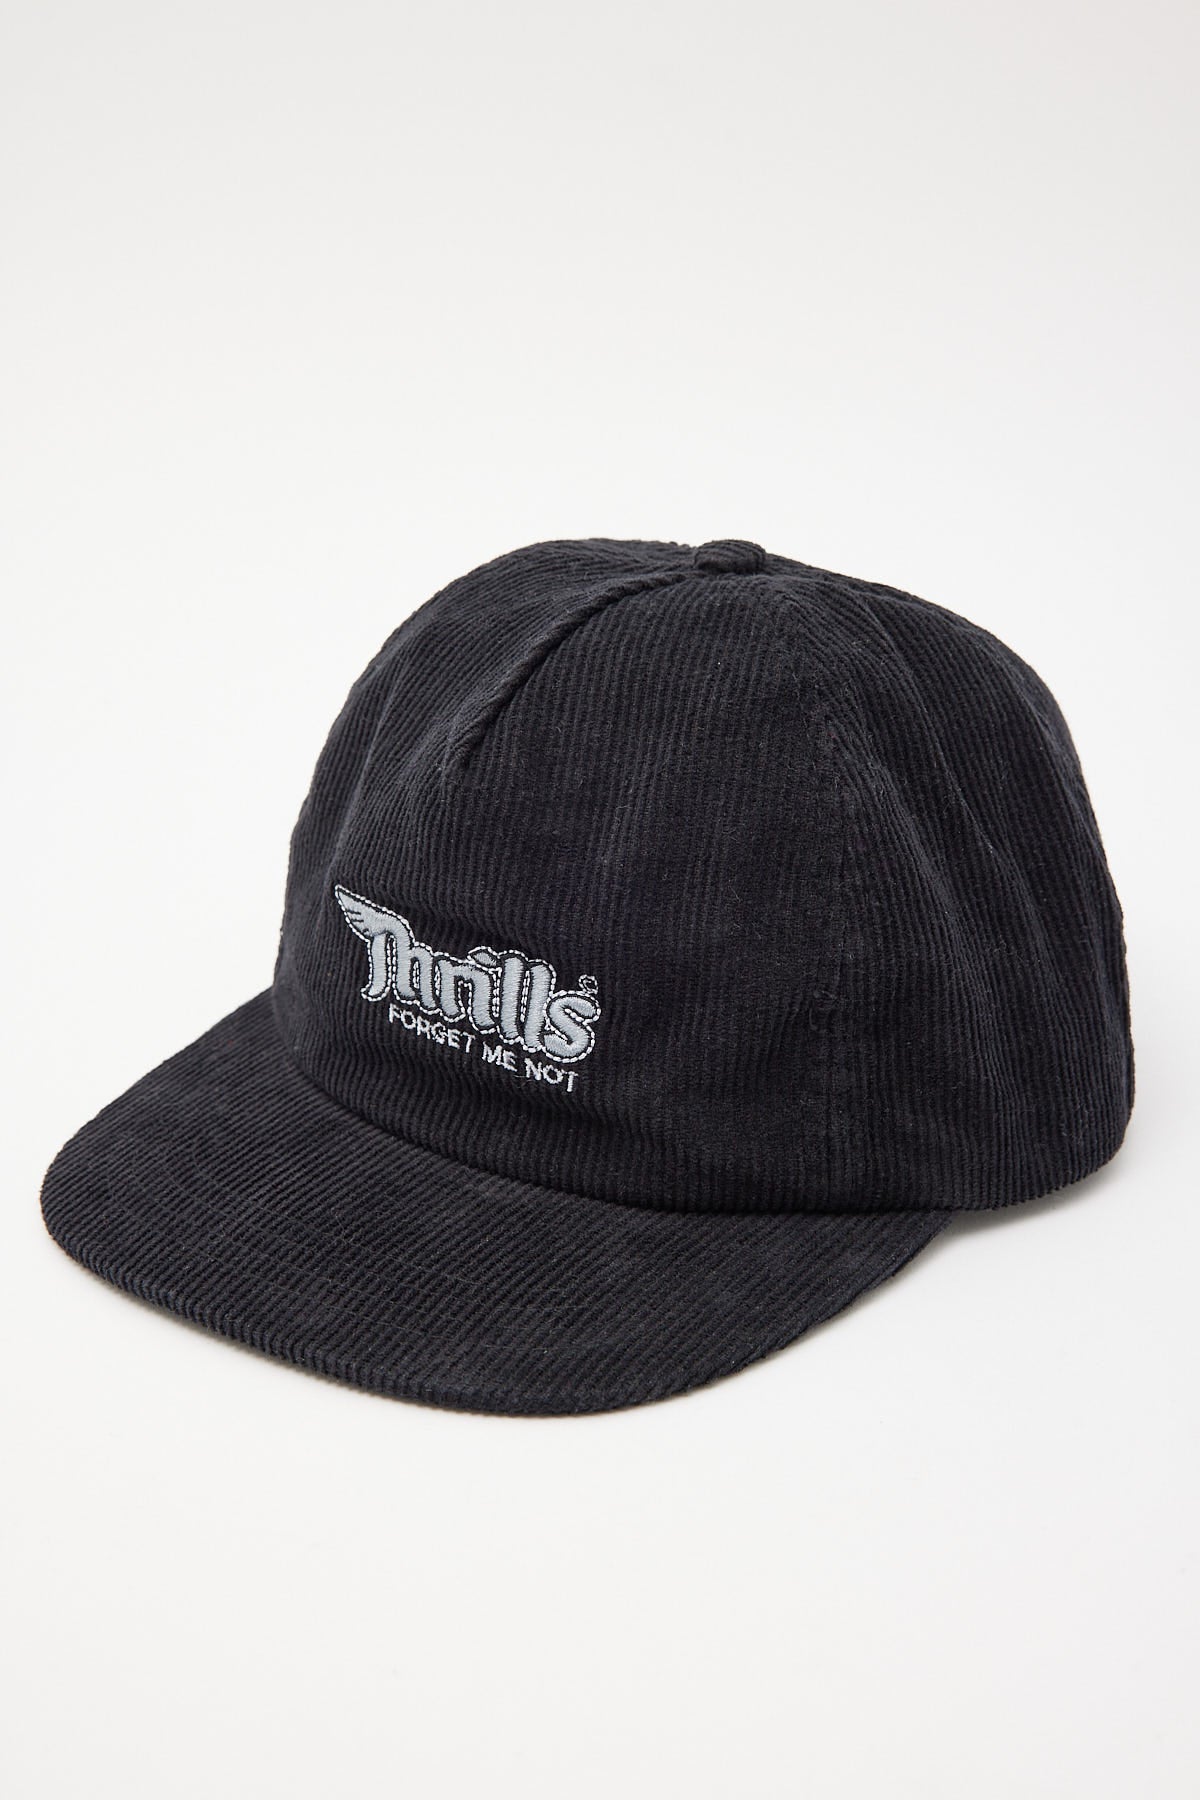 Thrills Forget Me Not Cap Black Cord